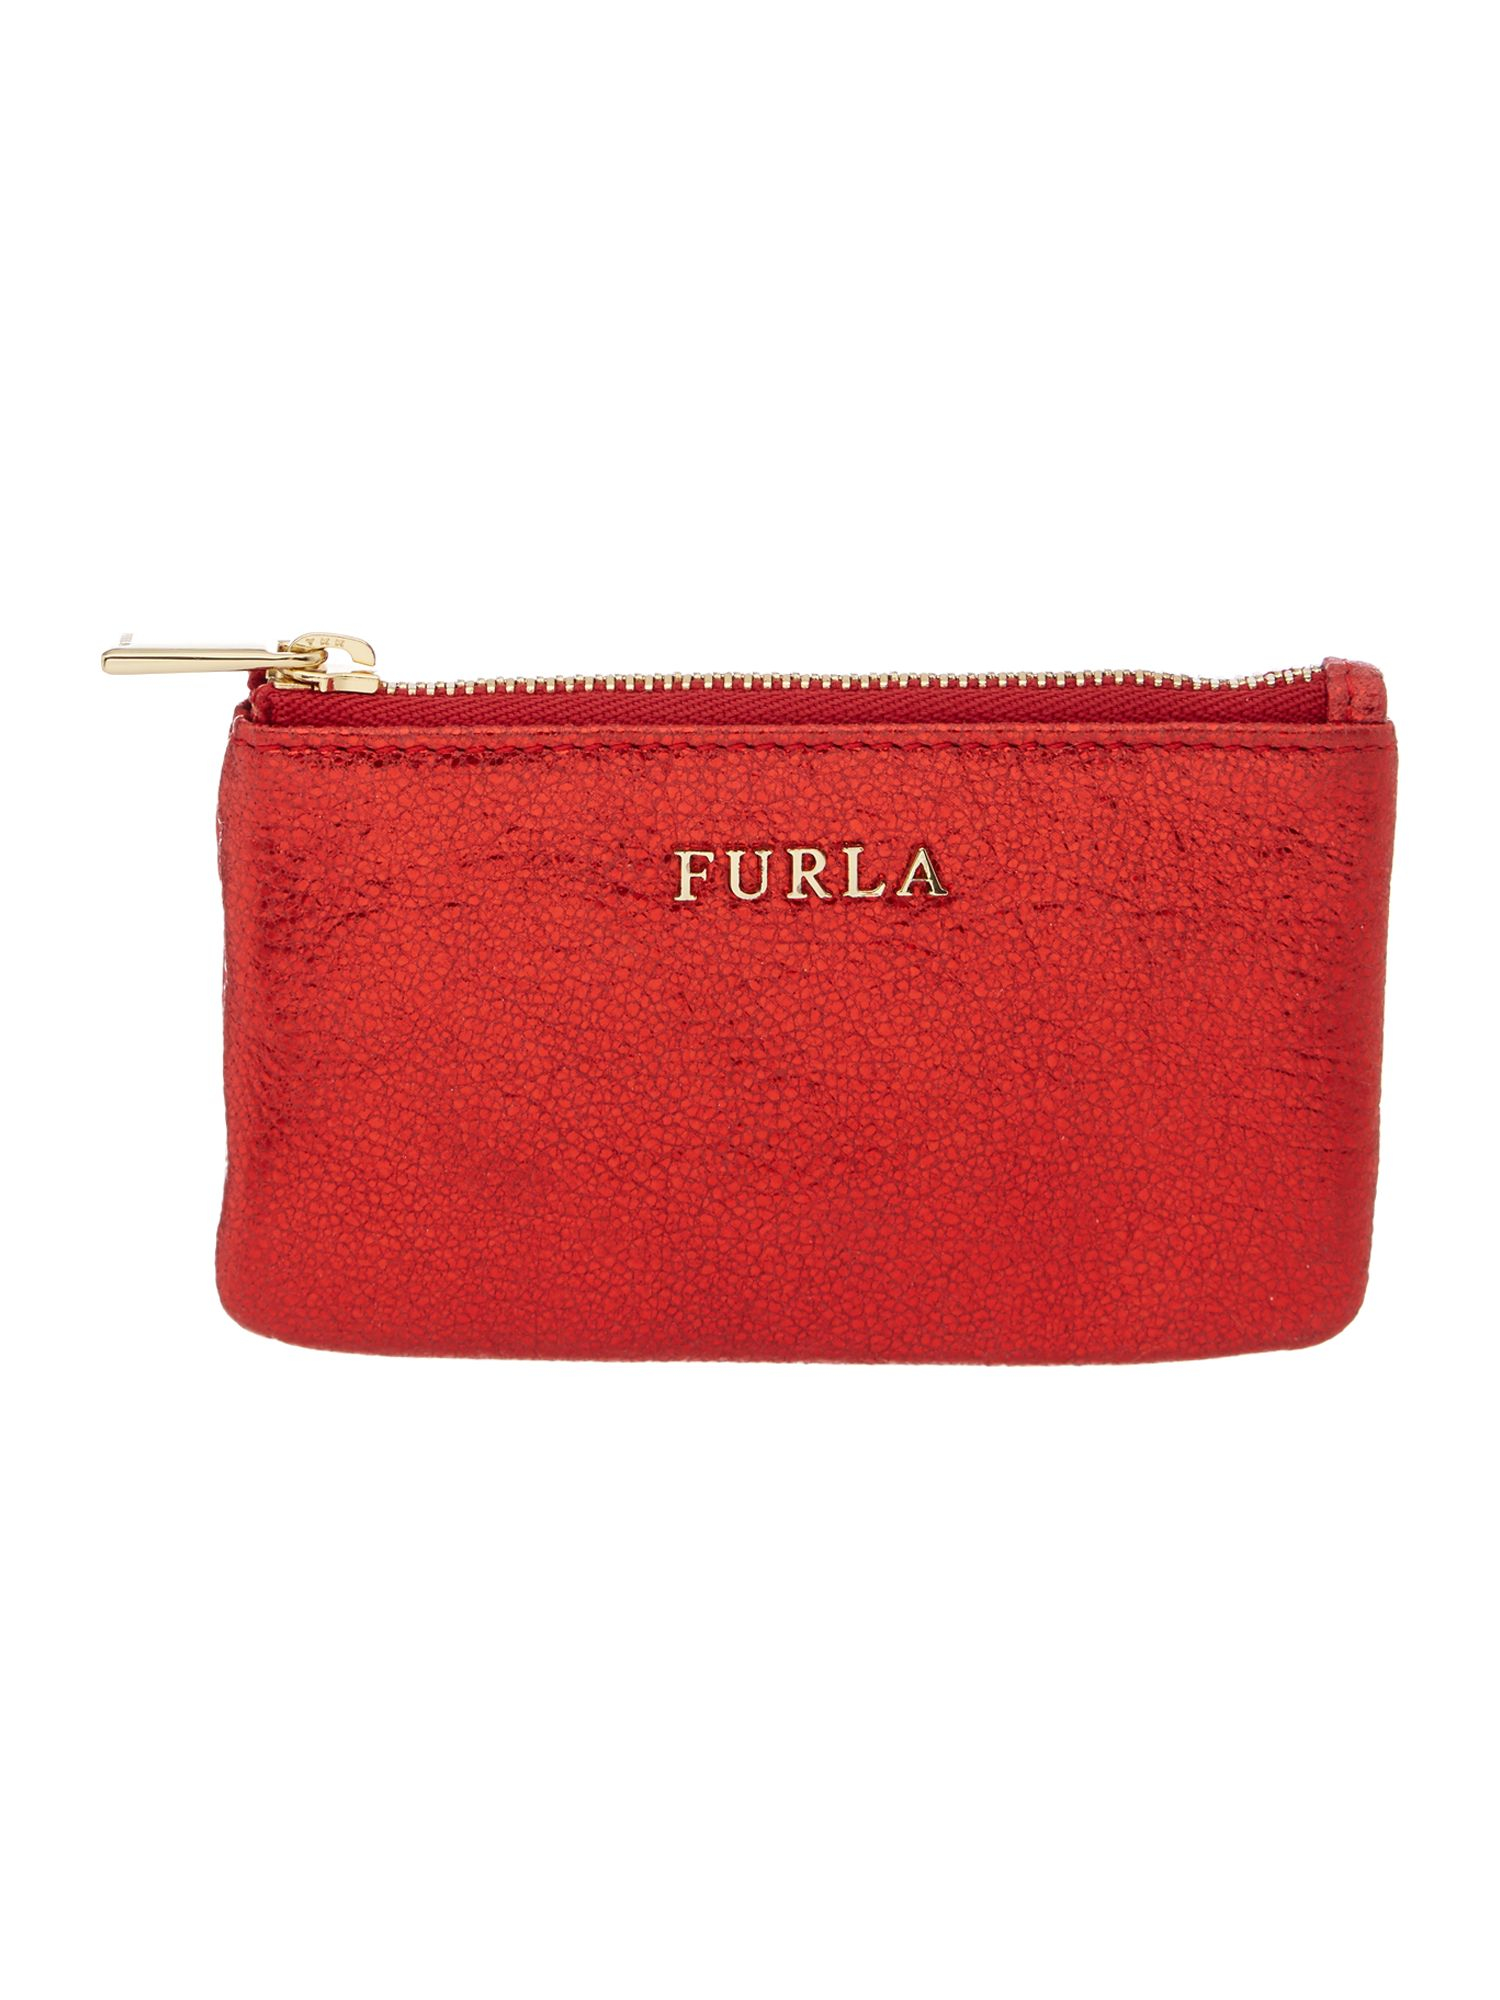 Furla Babylon Red Coin Purse in Red | Lyst